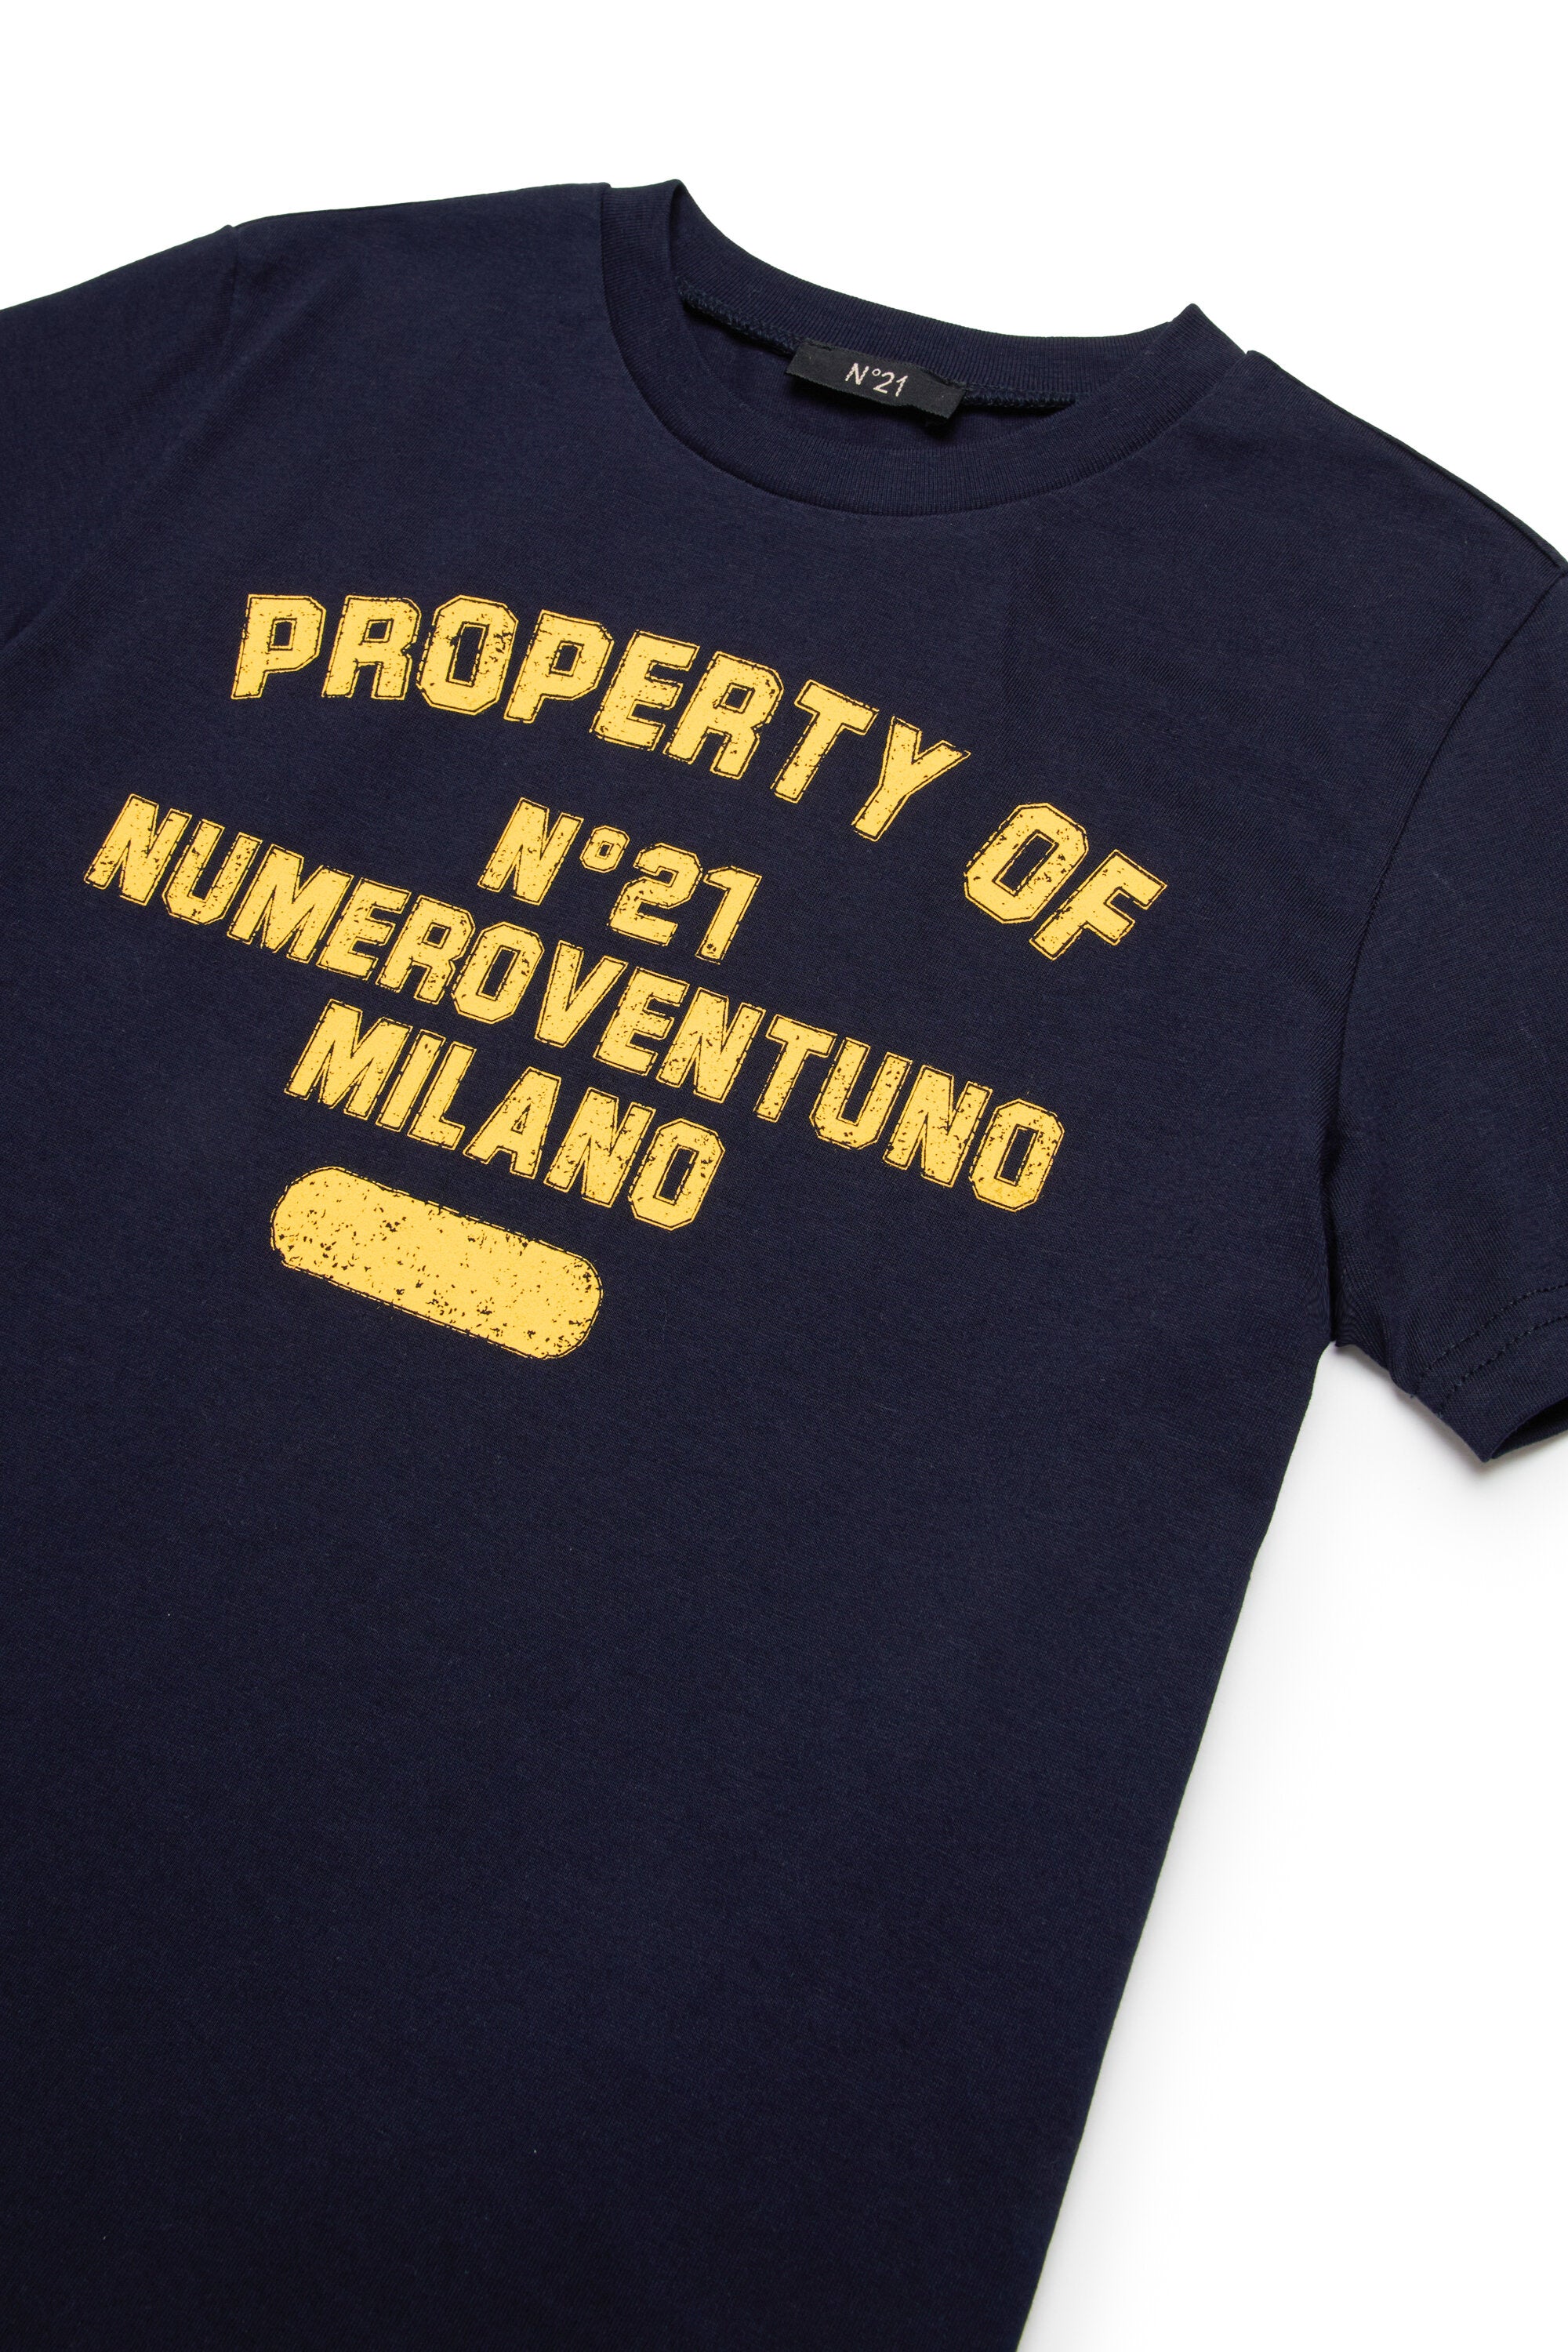 Property of N°21 branded T-shirt